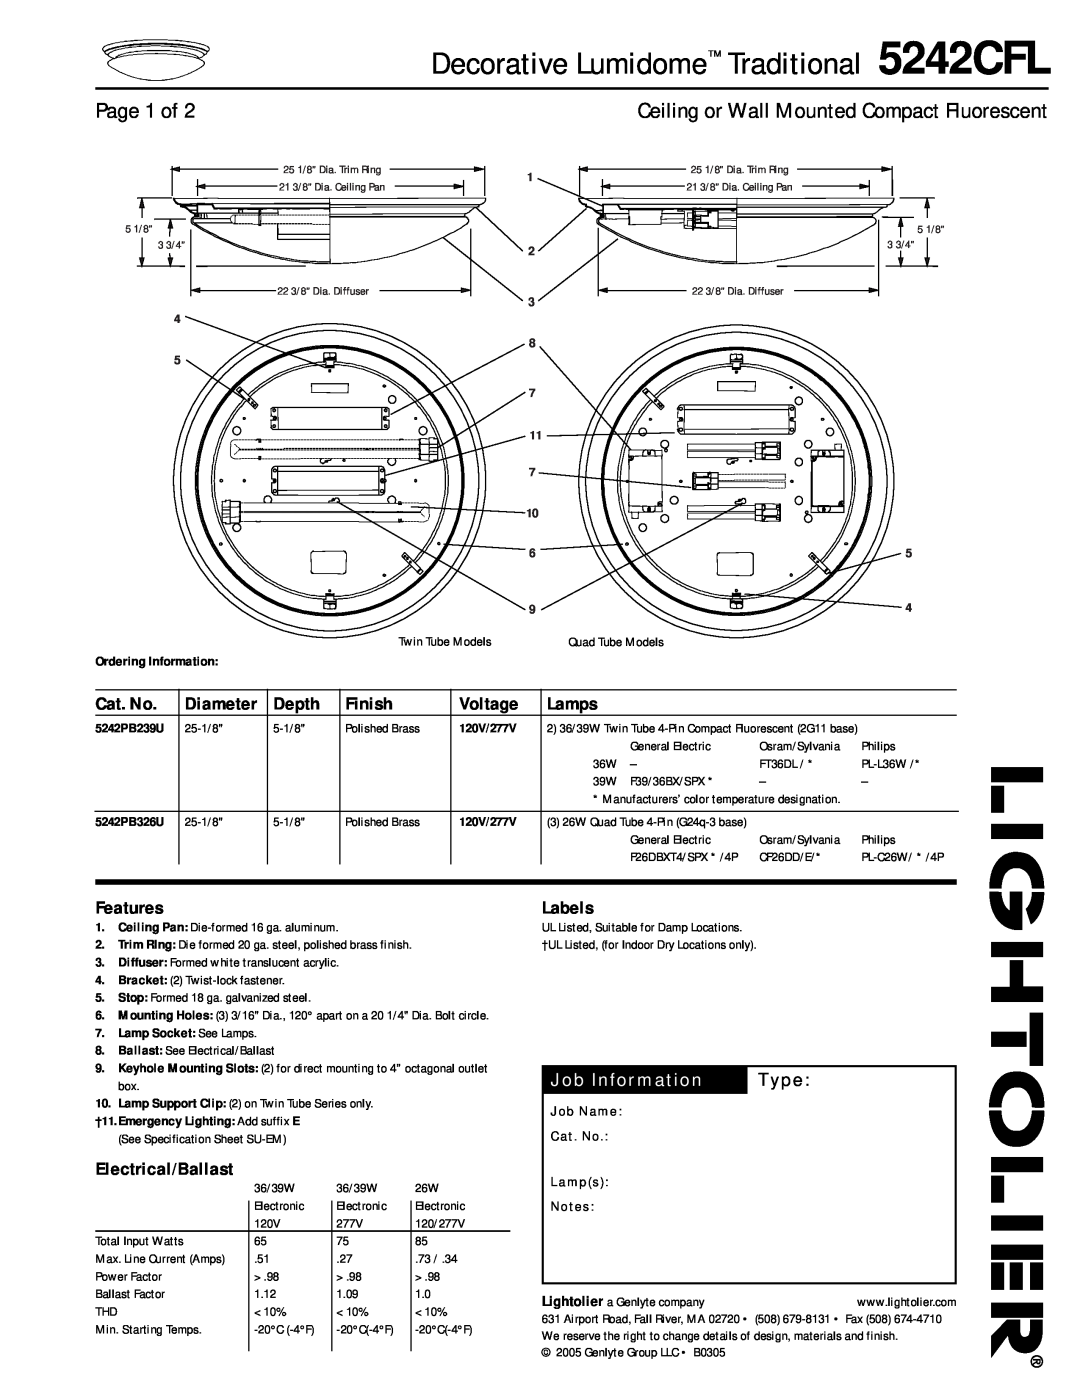 Lightolier specifications Decorative Lumidome Traditional 5242CFL, Page 1 of, Diameter, Job Information, Type, Cat. No 